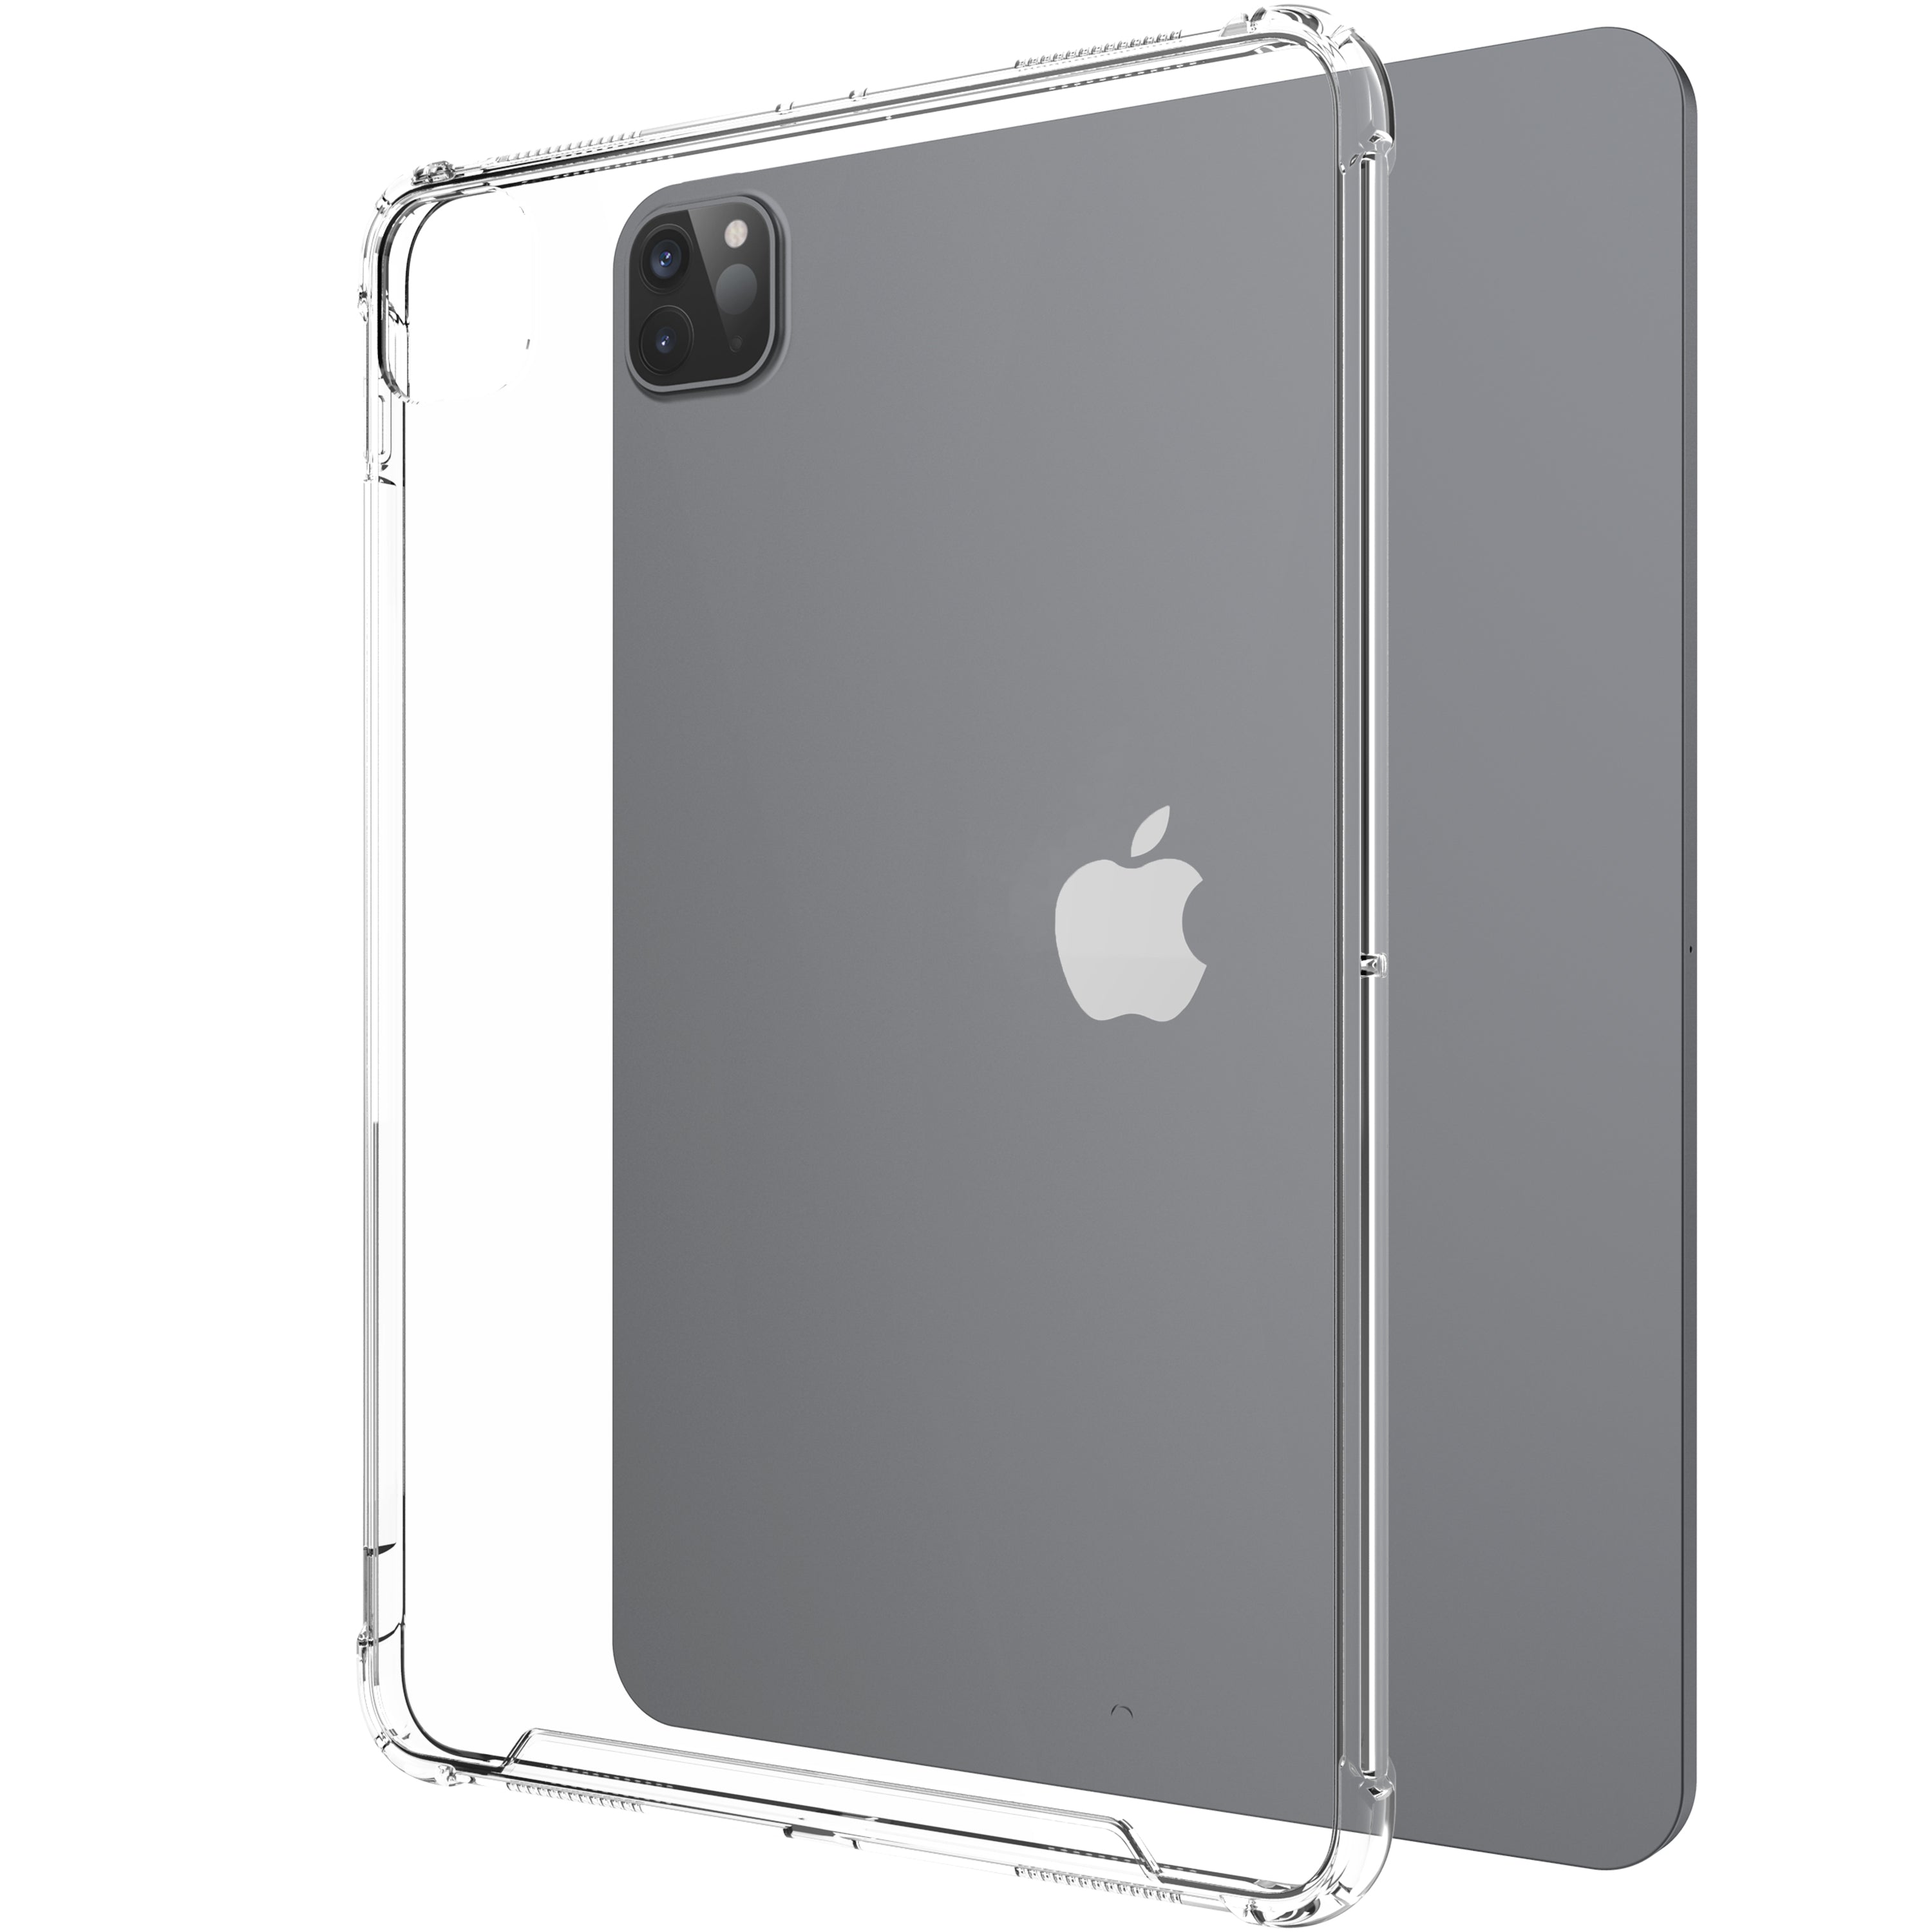 CLEARVIEW Case for iPad Pro 12.9 2020 Clear View Hybrid Slim Back Cover - Clear